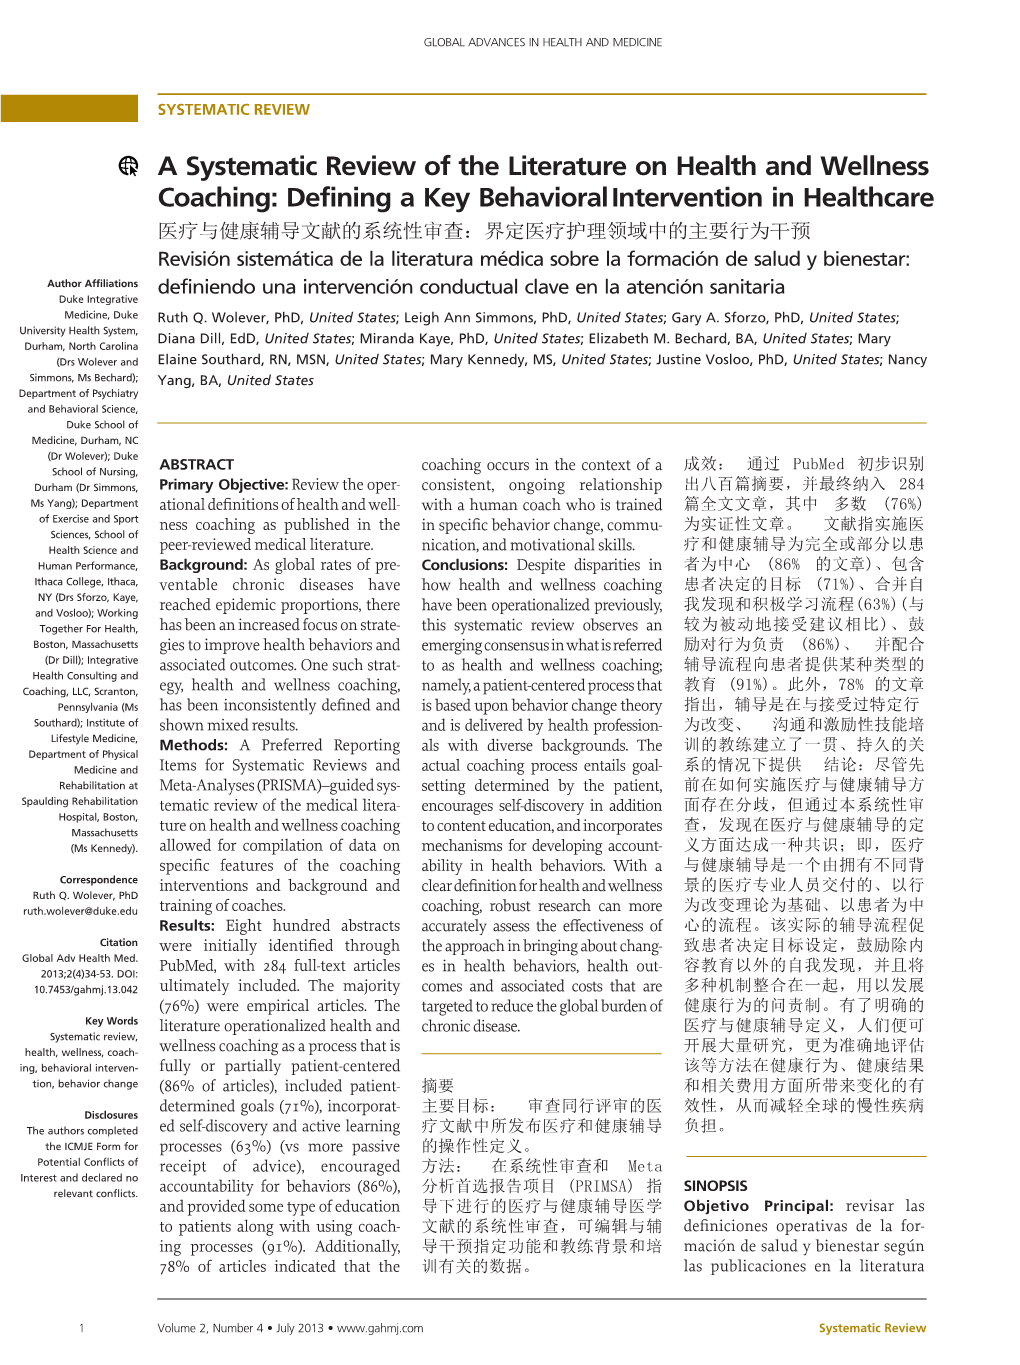 A Systematic Review of the Literature on Health and Wellness Coaching: Defining a Key Behavioral Intervention in Healthcare